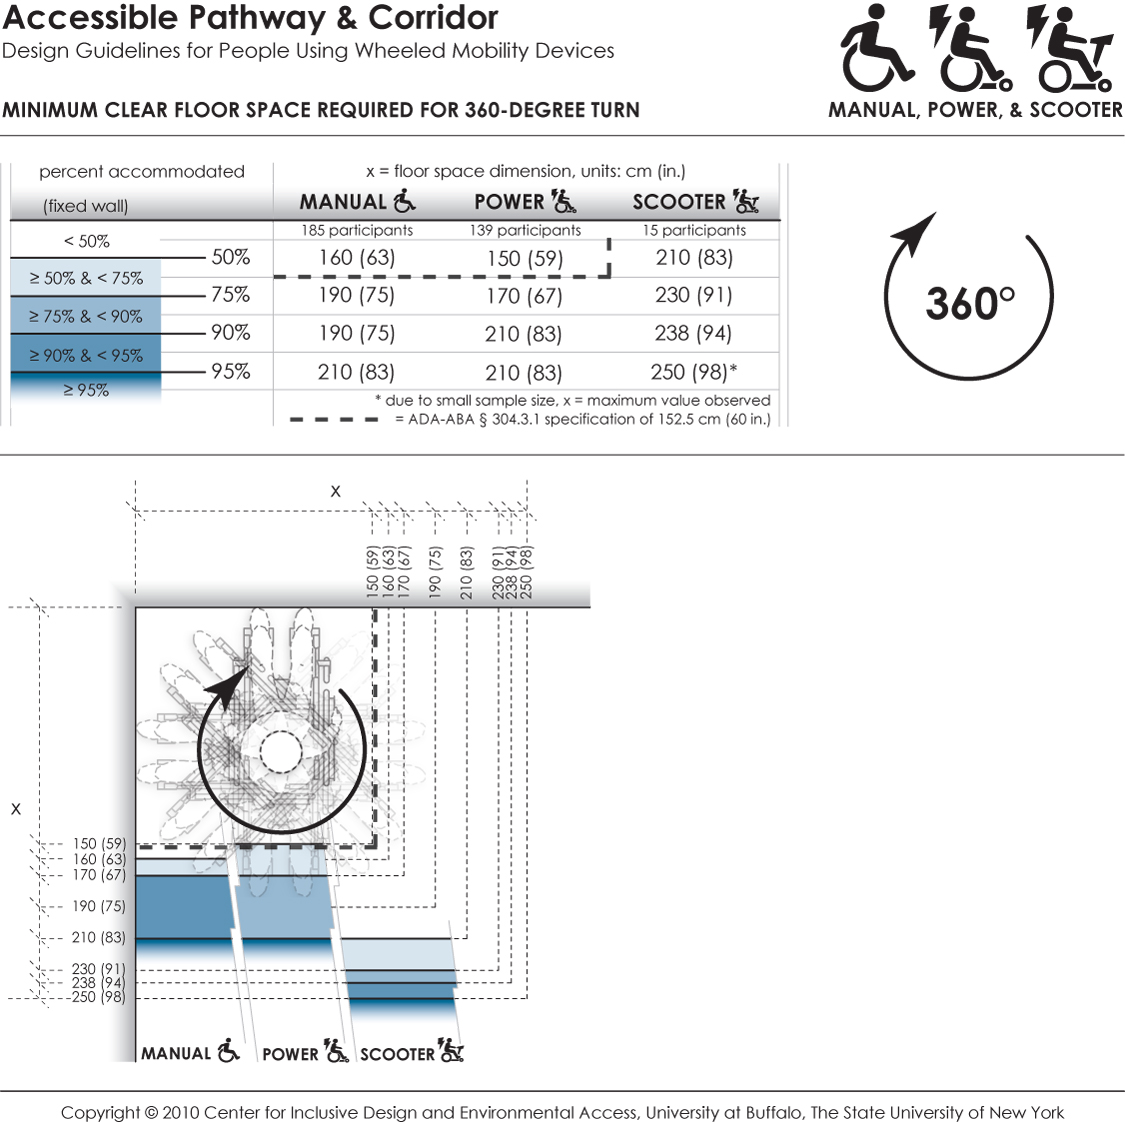 This data depicts the amount of space required by users of wheeled mobility devices to perform a 360-degree turn. The bold dashed line in the table and figure indicates the current ADA-ABA requirement of a 152.5 cm (60 in.) turn space. Findings from the Anthropometry of Wheeled Mobility Study indicate that a square space of at least 160 x 160 cm (63 in.) was required for 50% of the manual wheelchair users measured in this study to perform a 360-degree turn. A space of 210 x 210 cm (83 in.) was required in order for 95% of manual wheelchair and power chair users to complete the turn, with 95% of scooter users needing a space of at least 250 x 250 cm (98 in.) These data are based on measurements of wheeled mobility users performing 360-degree turns within an enclosed square space built with mock walls. The enclosed space was incrementally varied from a size of 130 x 130 cm (51 in.) to 250 x 250 cm (98 in.) The minimum space required to perform a complete 360-degree turn within moving or knocking down any of the walls was recorded. Use of multiple short turns was allowed in contrast to a single continuous turn.